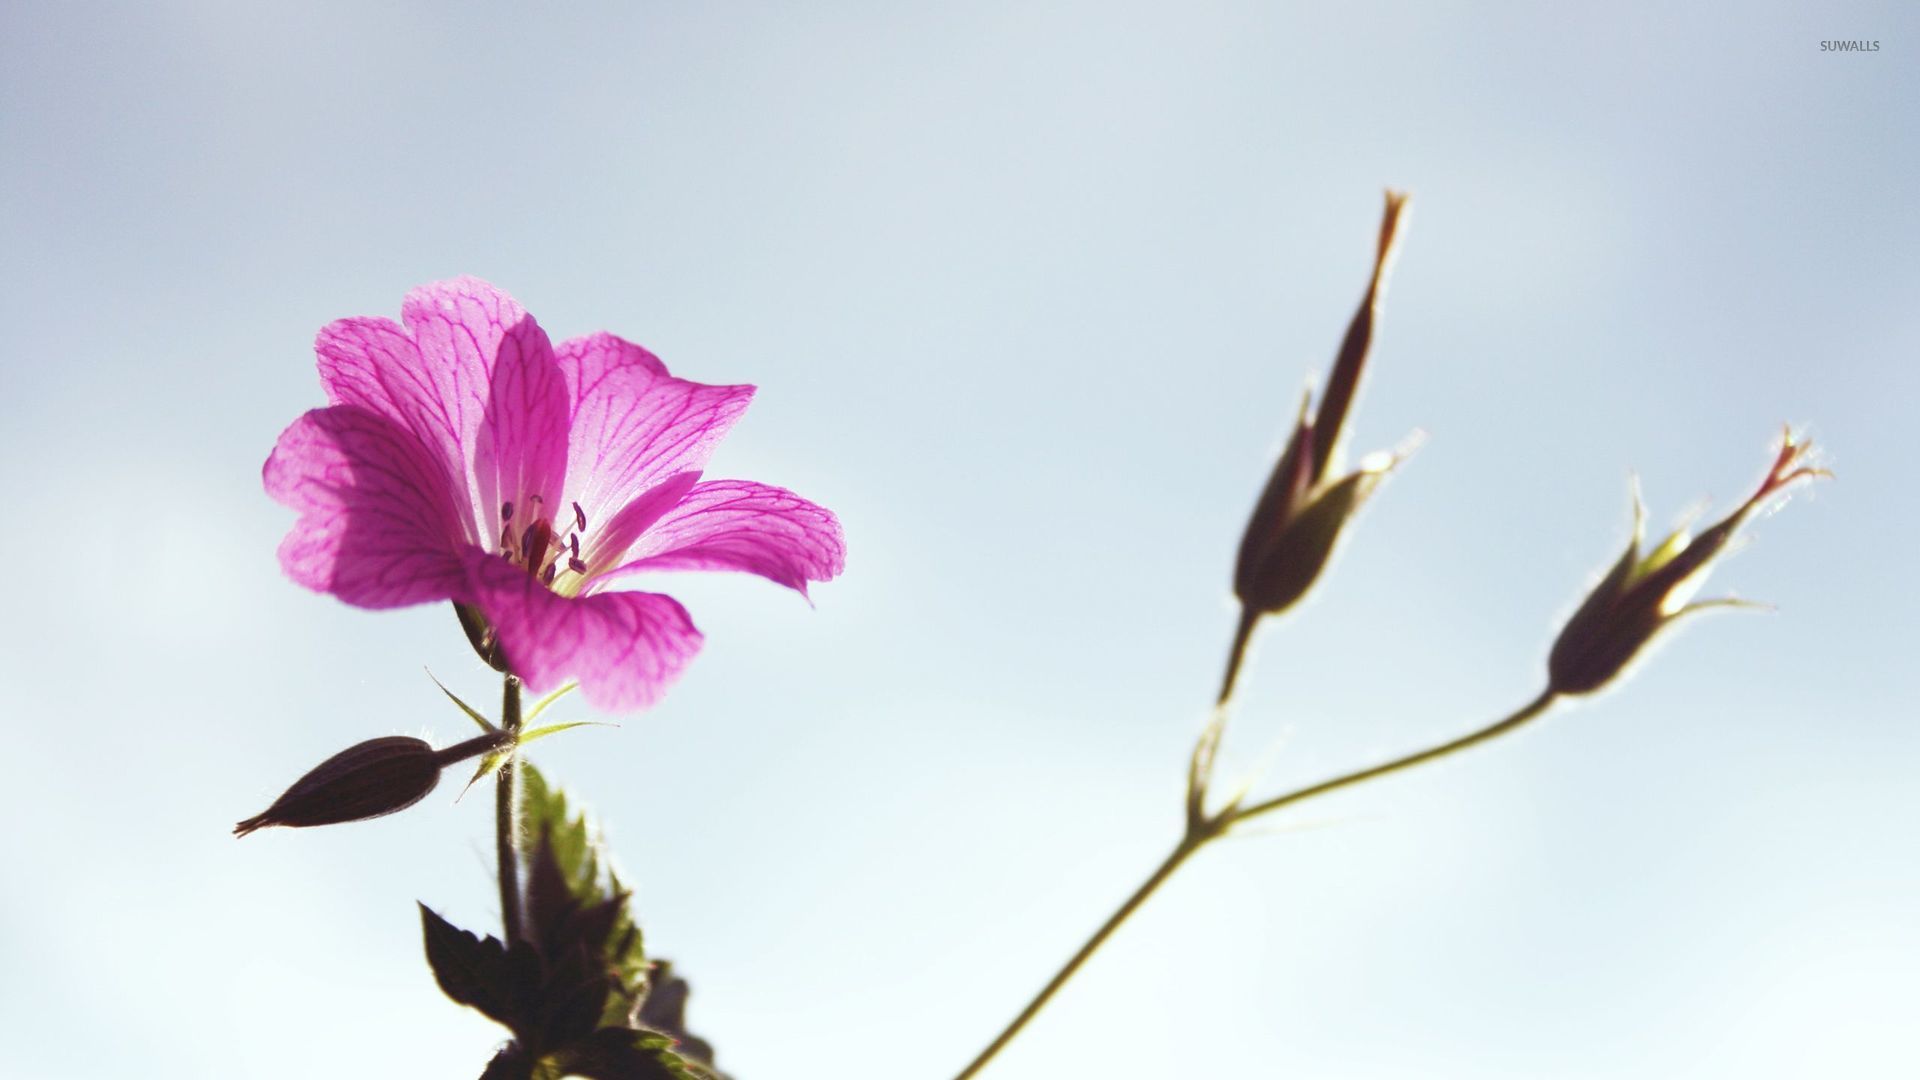 Pink flower rising towards the clear sky wallpaper - Flower wallpapers ...